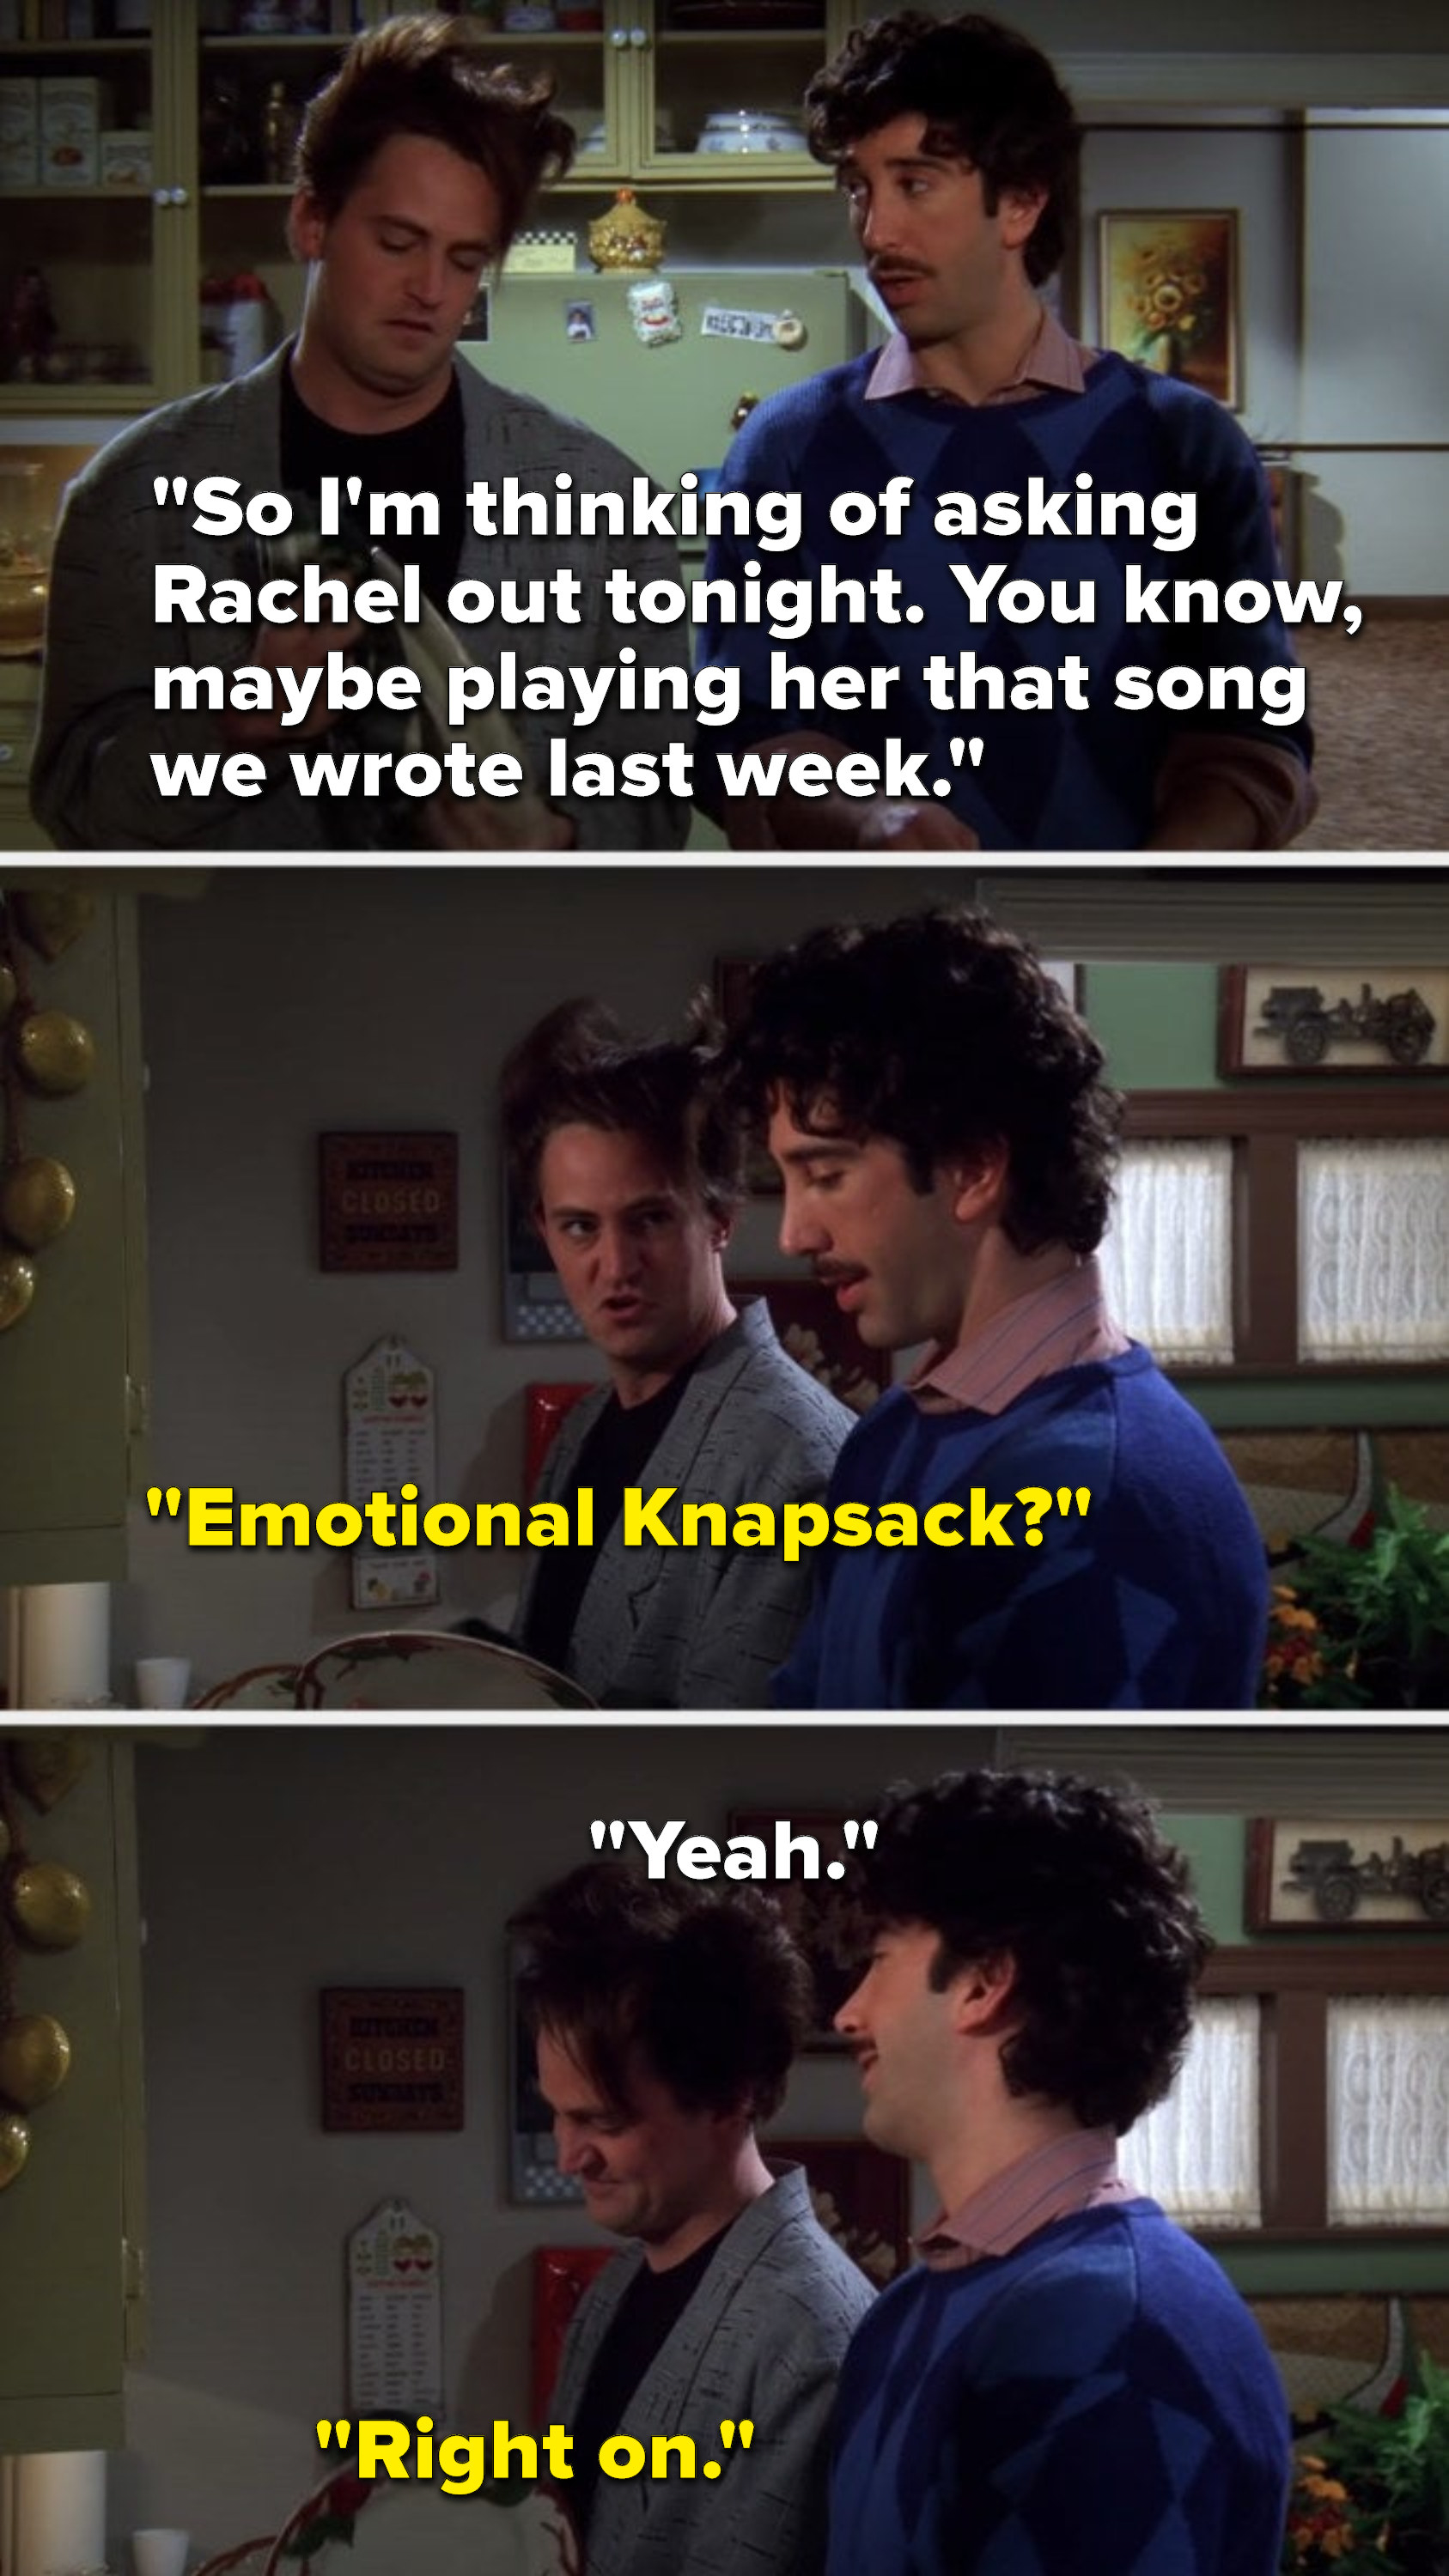 Ross says, &quot;So I&#x27;m thinking of asking Rachel out tonight, you know, maybe playing her that song we wrote last week,&quot; Chandler asks, &quot;Emotional Knapsack,&quot; Ross says, &quot;Yeah,&quot; and Chandler says, &quot;Right on&quot;